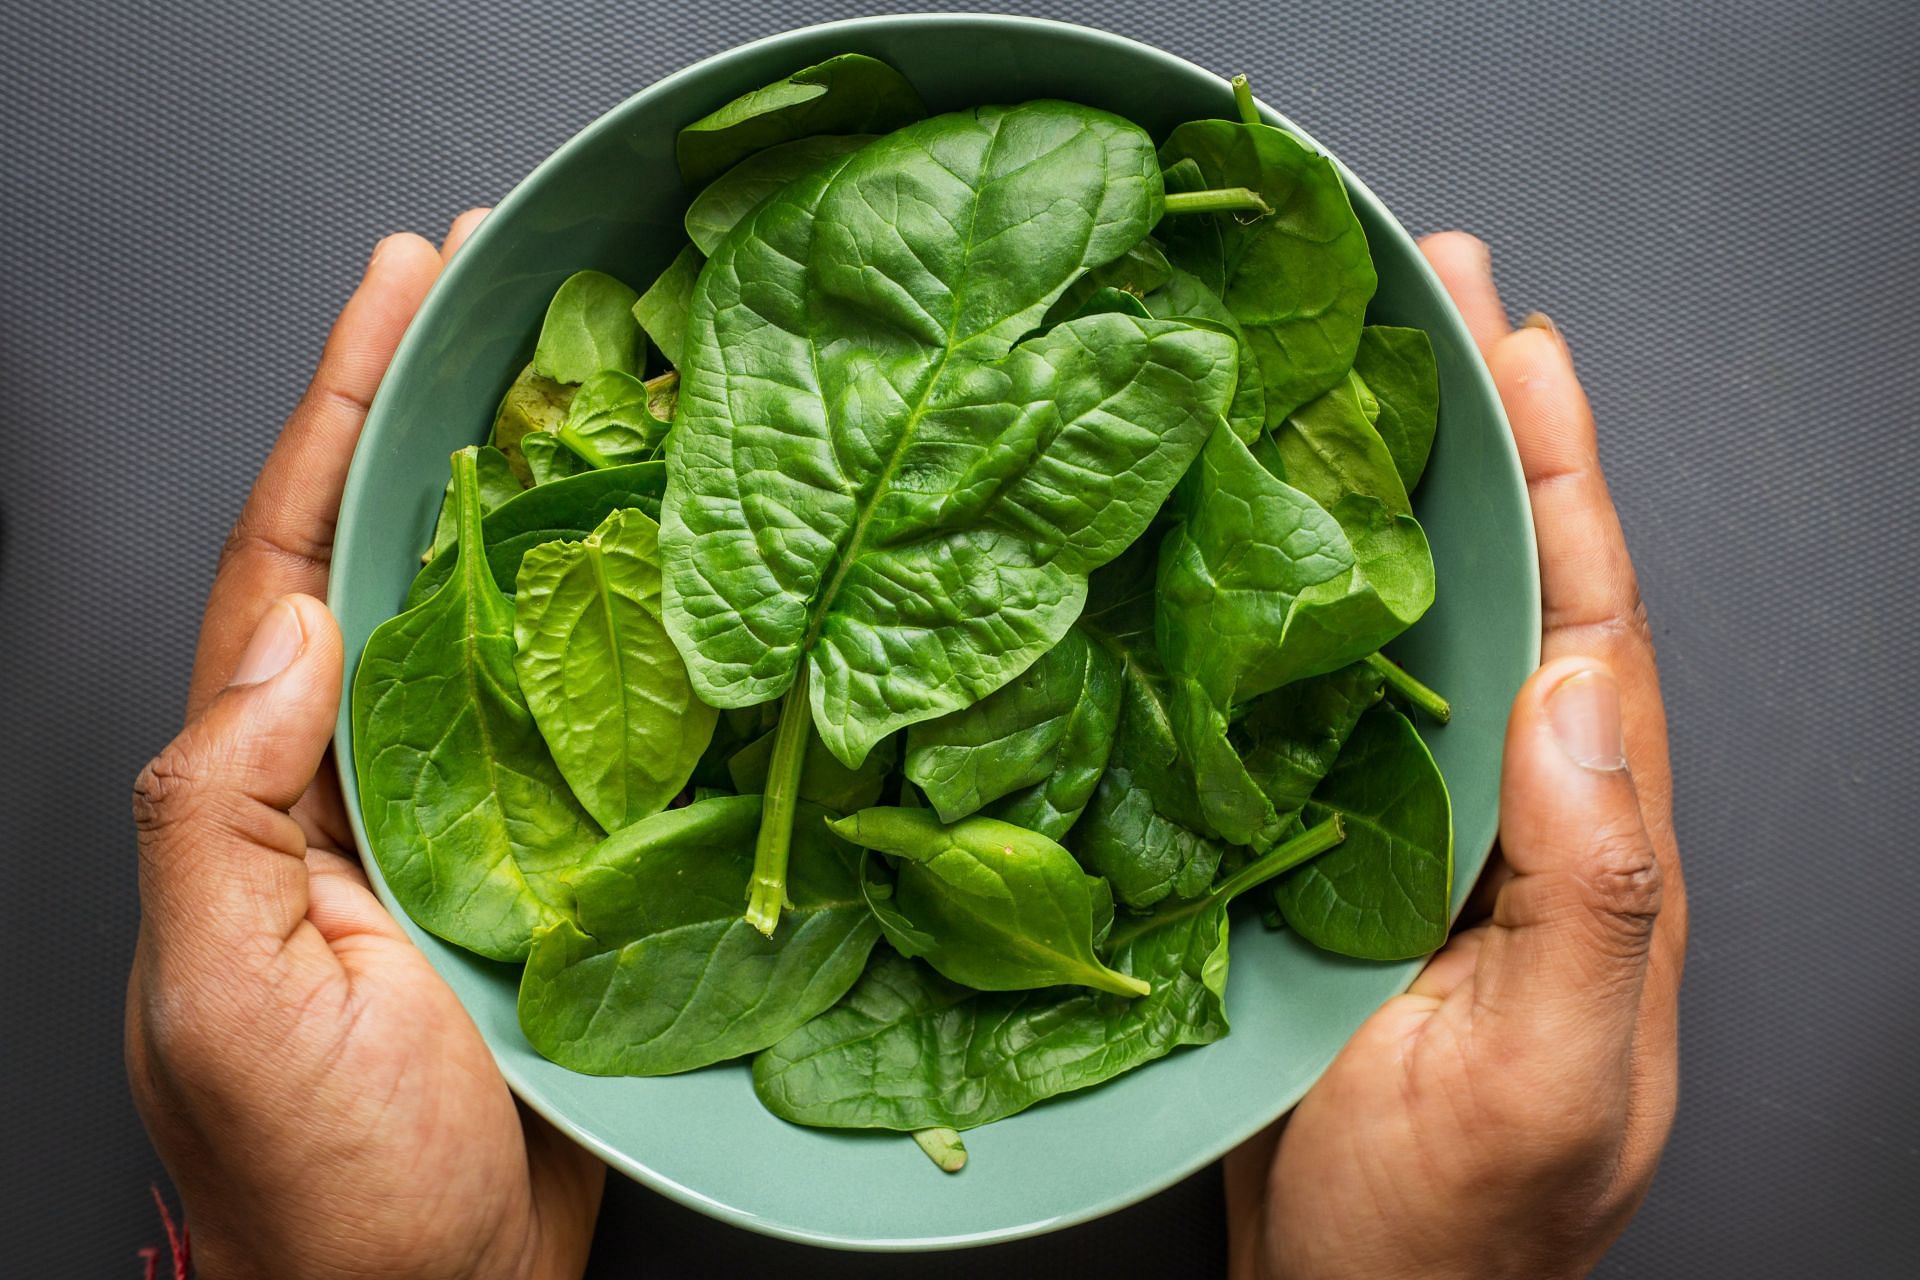 Spinach is rich in vitamins and minerals. (Image via Unsplash/Louis hansel)